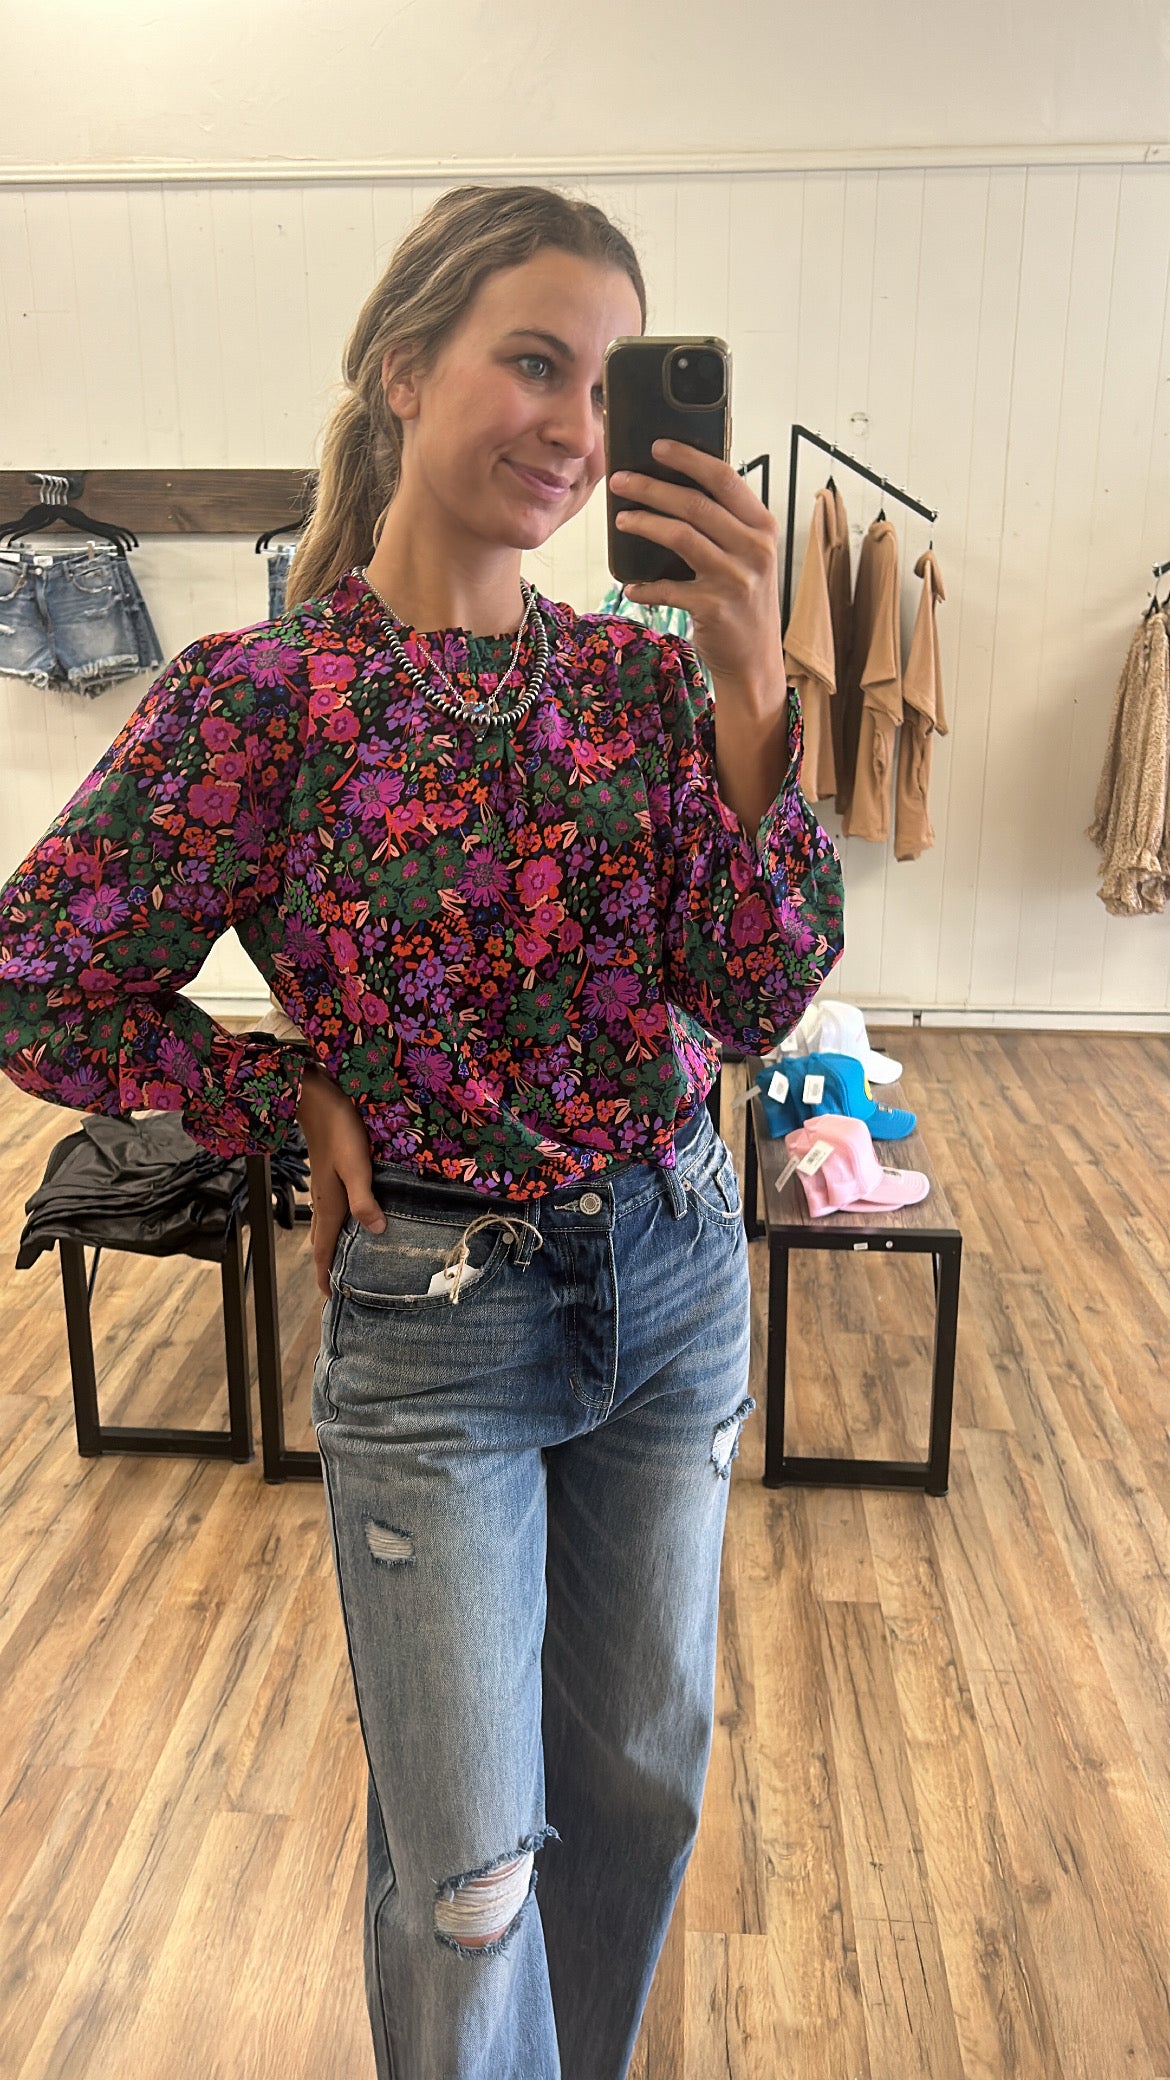 The Floral Top